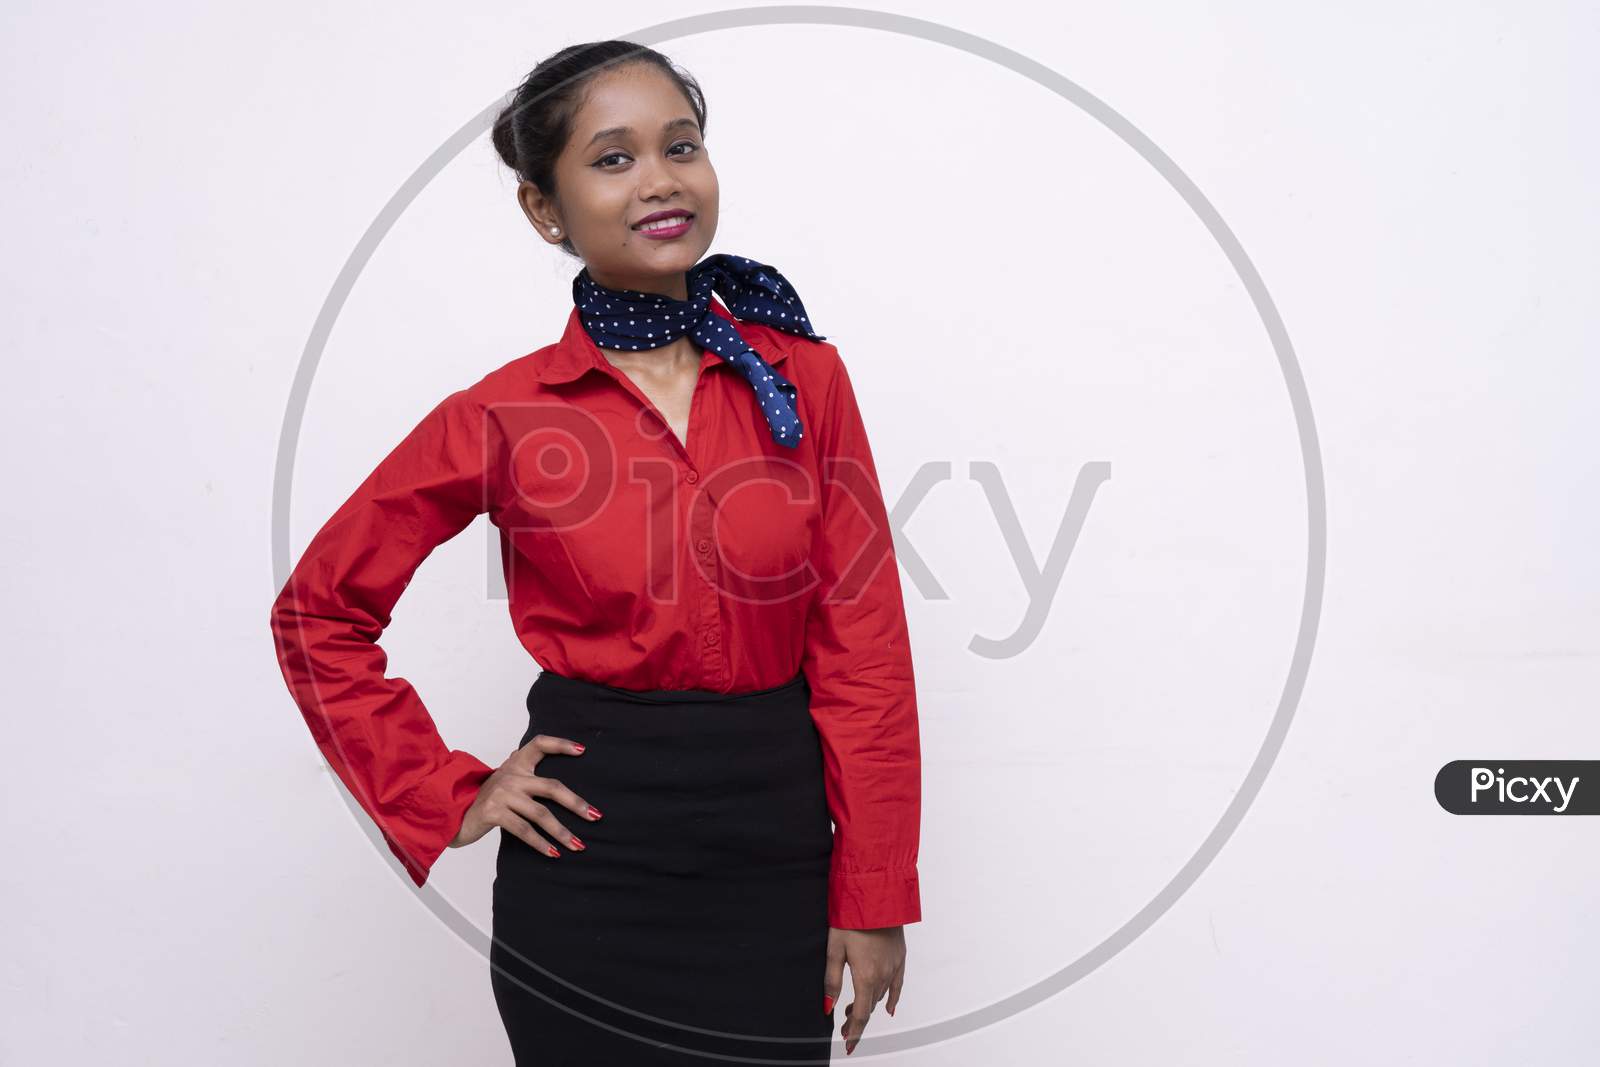 Young Charming Air Hostess In Red Dress With Blue Collar Posing In Front Of The Camera With White Background And Copy Space.